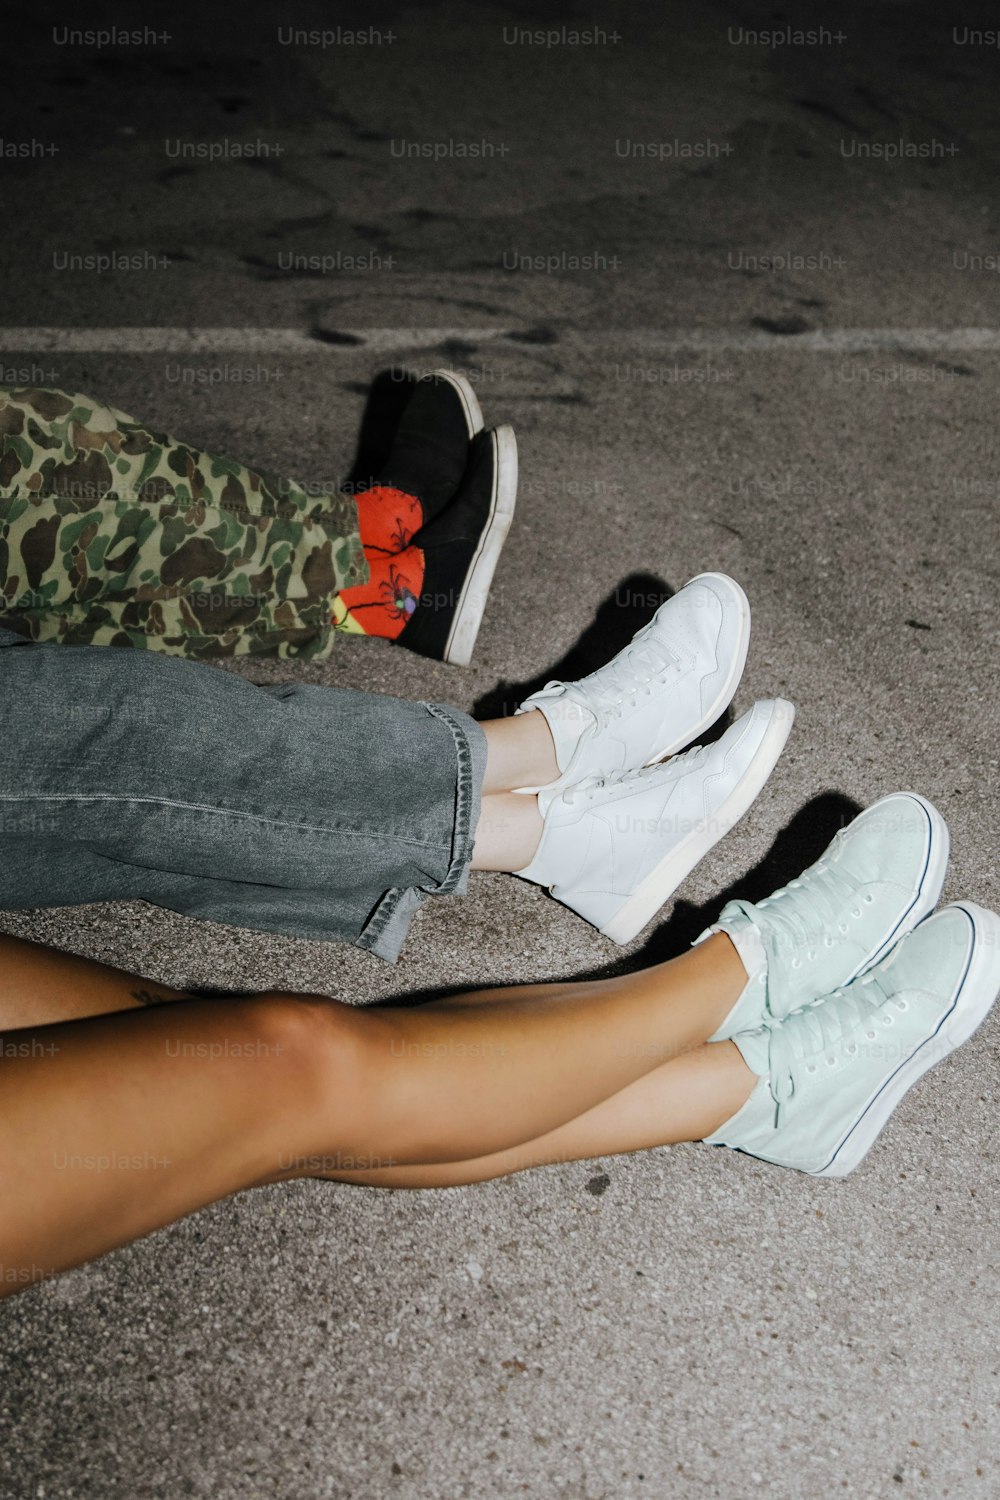 A person laying on a bed with their feet up photo – Free Sneaker Image on  Unsplash